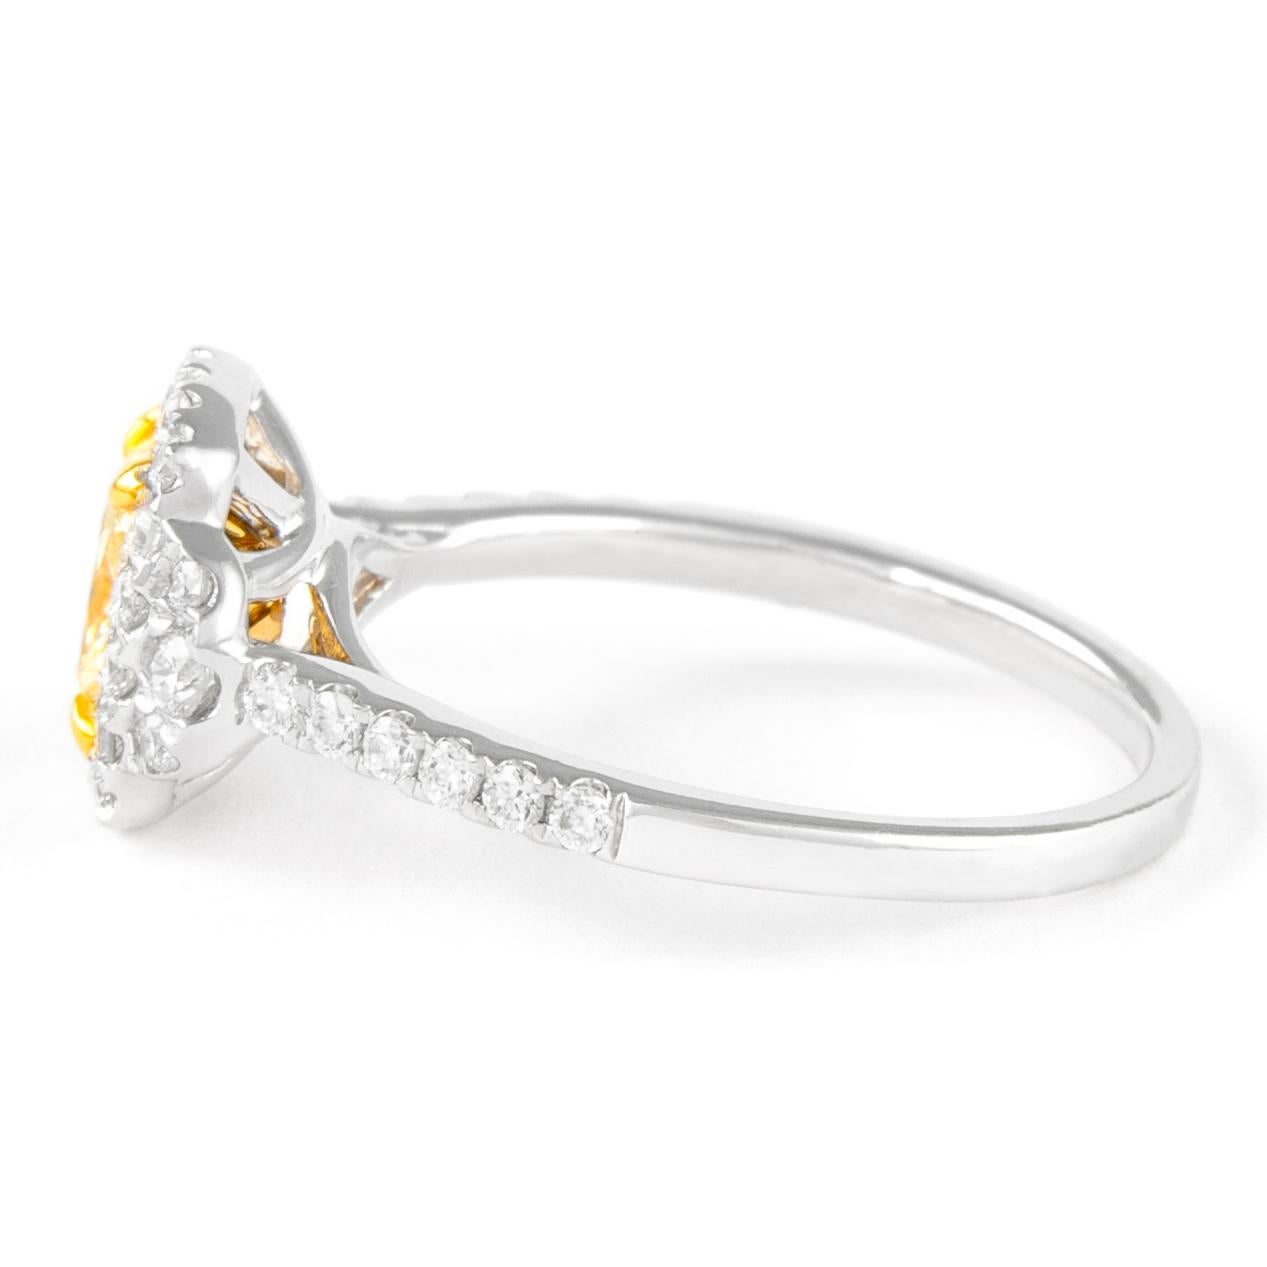 Cushion Cut Alexander 1.07ct Fancy Intense Yellow Cushion Diamond with Halo Ring 18k For Sale